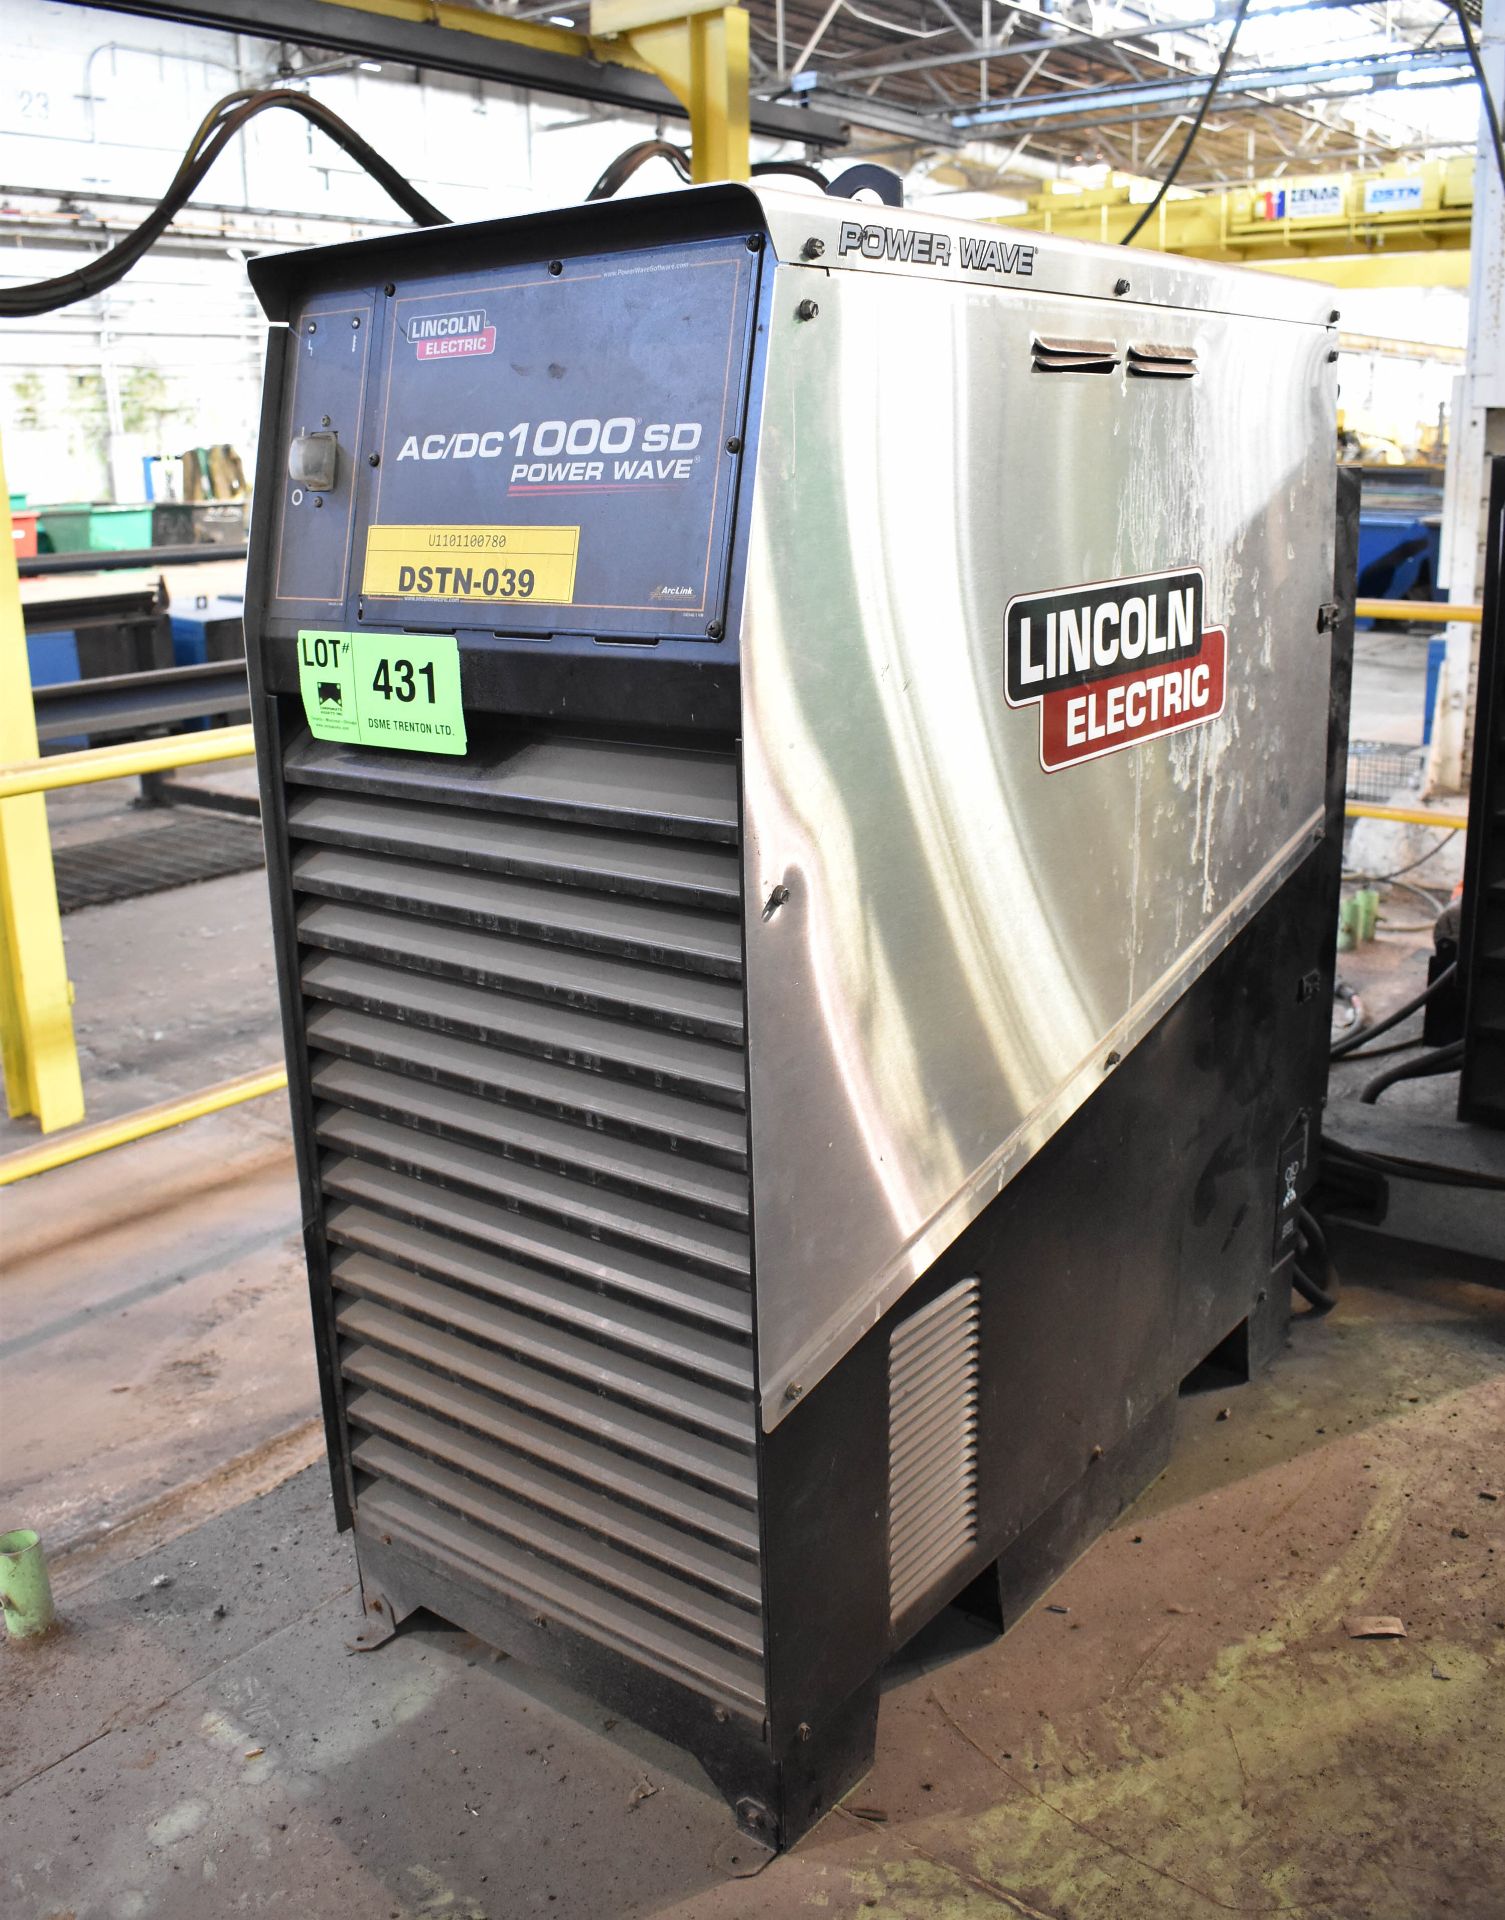 JONGHAP - LINCOLN ELECTRIC GL-03 (2011) MA-75-01 CIRC/IN SUB ARC WELDING SYSTEM CONSISTING OF - Image 5 of 10